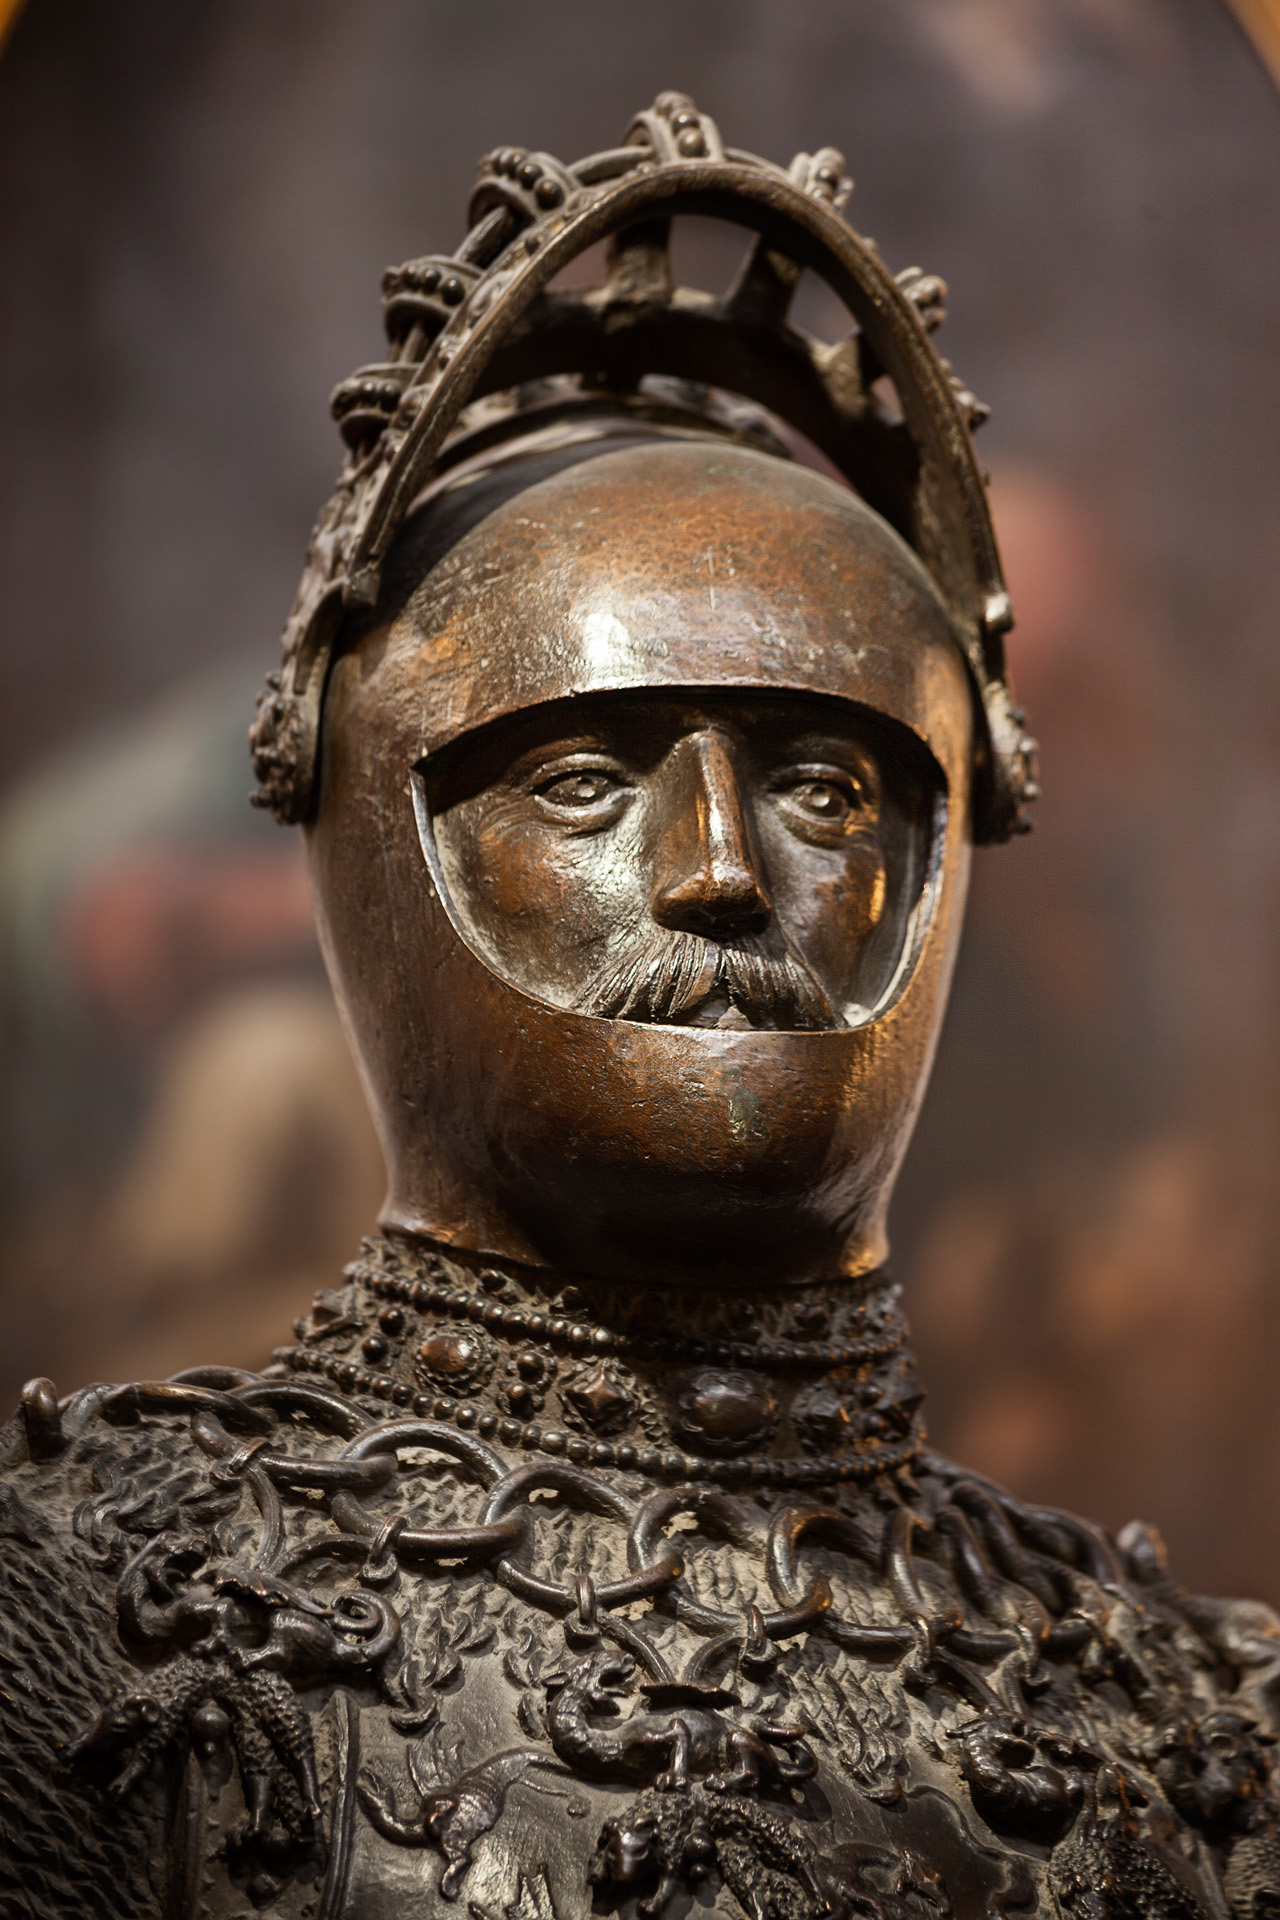  A bronze statue of King Arthur, legendary king of the 6th century Britons, is located in the Royal Chapel at Innsbruck, Austria, on the grave of Emperor Maximilian I. The cast was created by Peter Vischer the Elder in 1513 according to a design by A